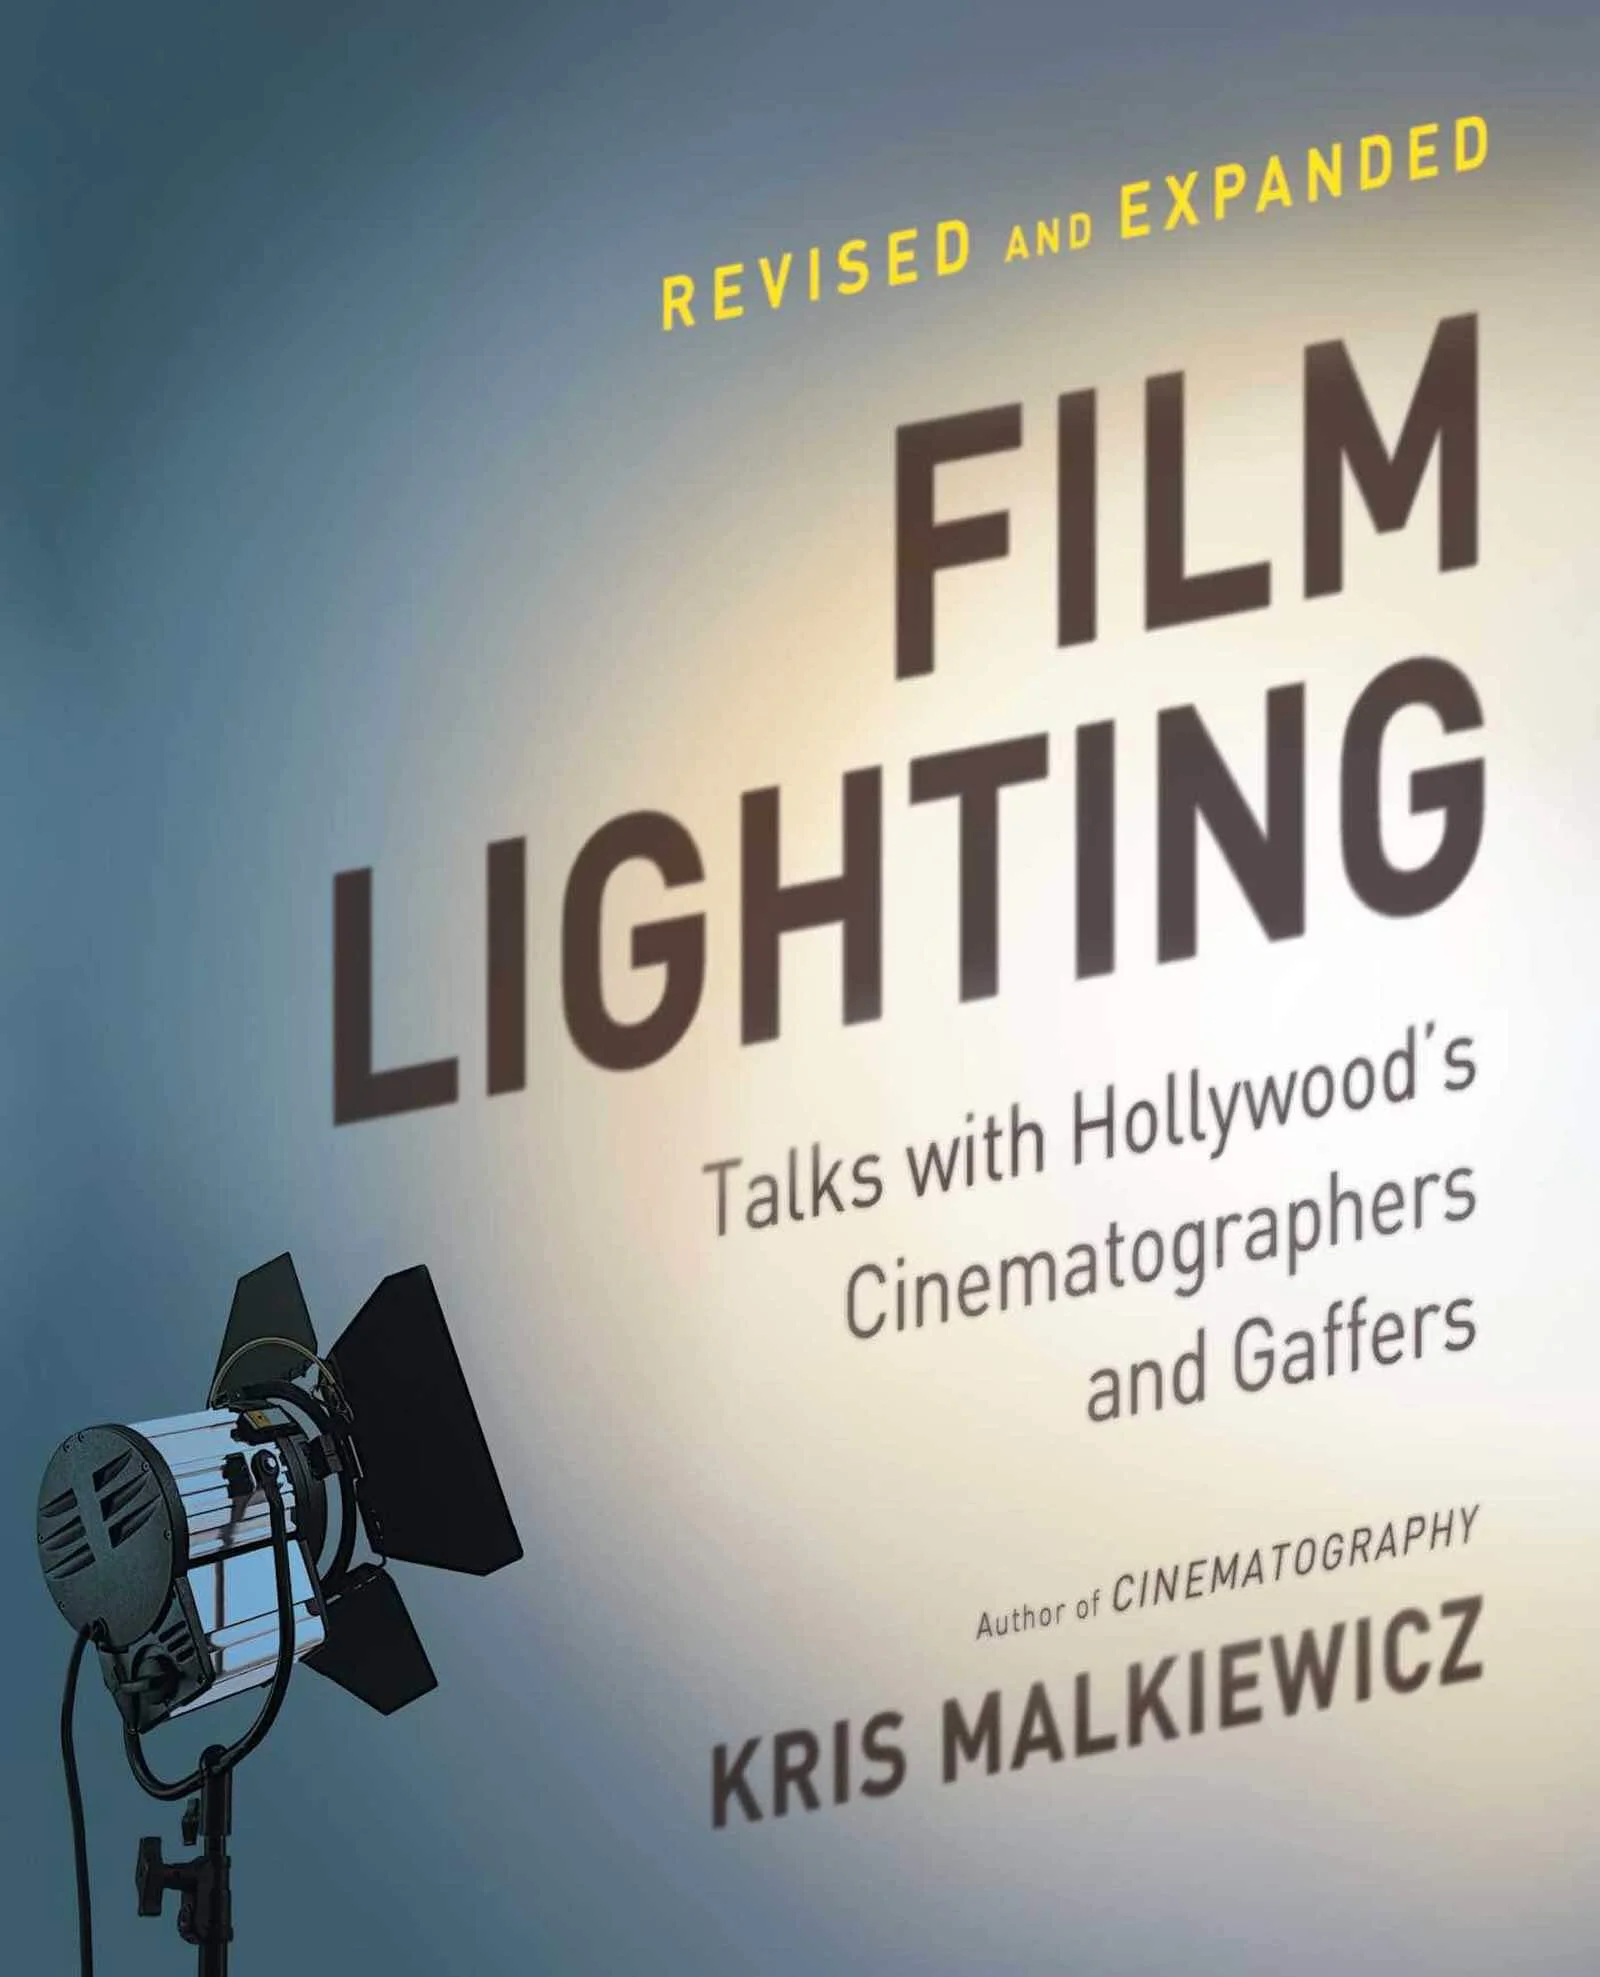 Essential Cinematography Books - Film Lighting Talks with Hollywood